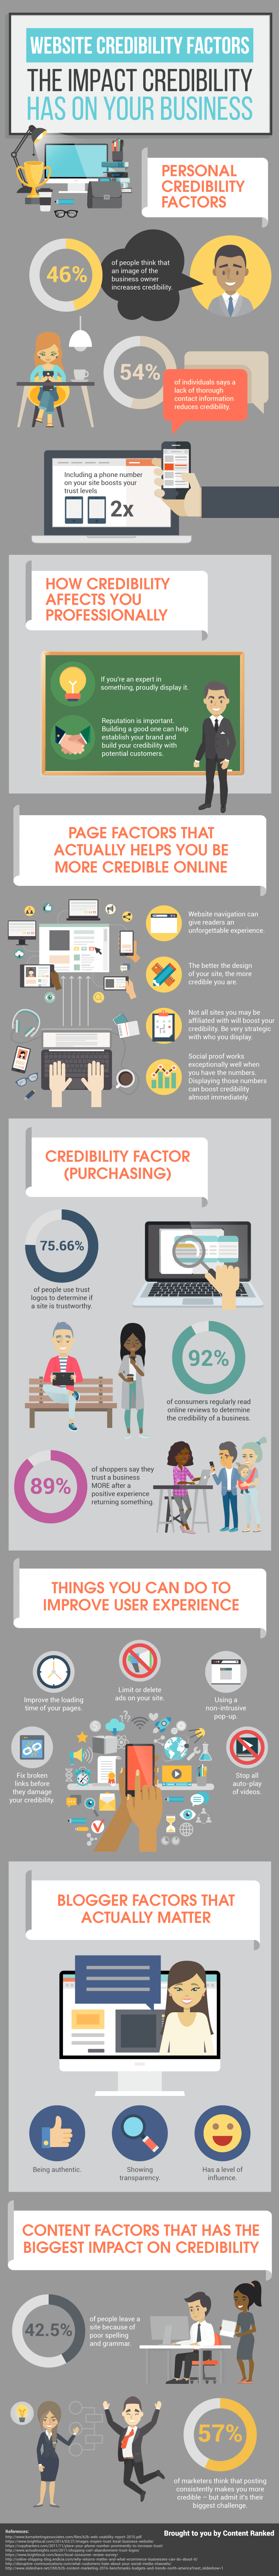 Why Credibility Affects EVERYTHING In Your Business [Infographic]